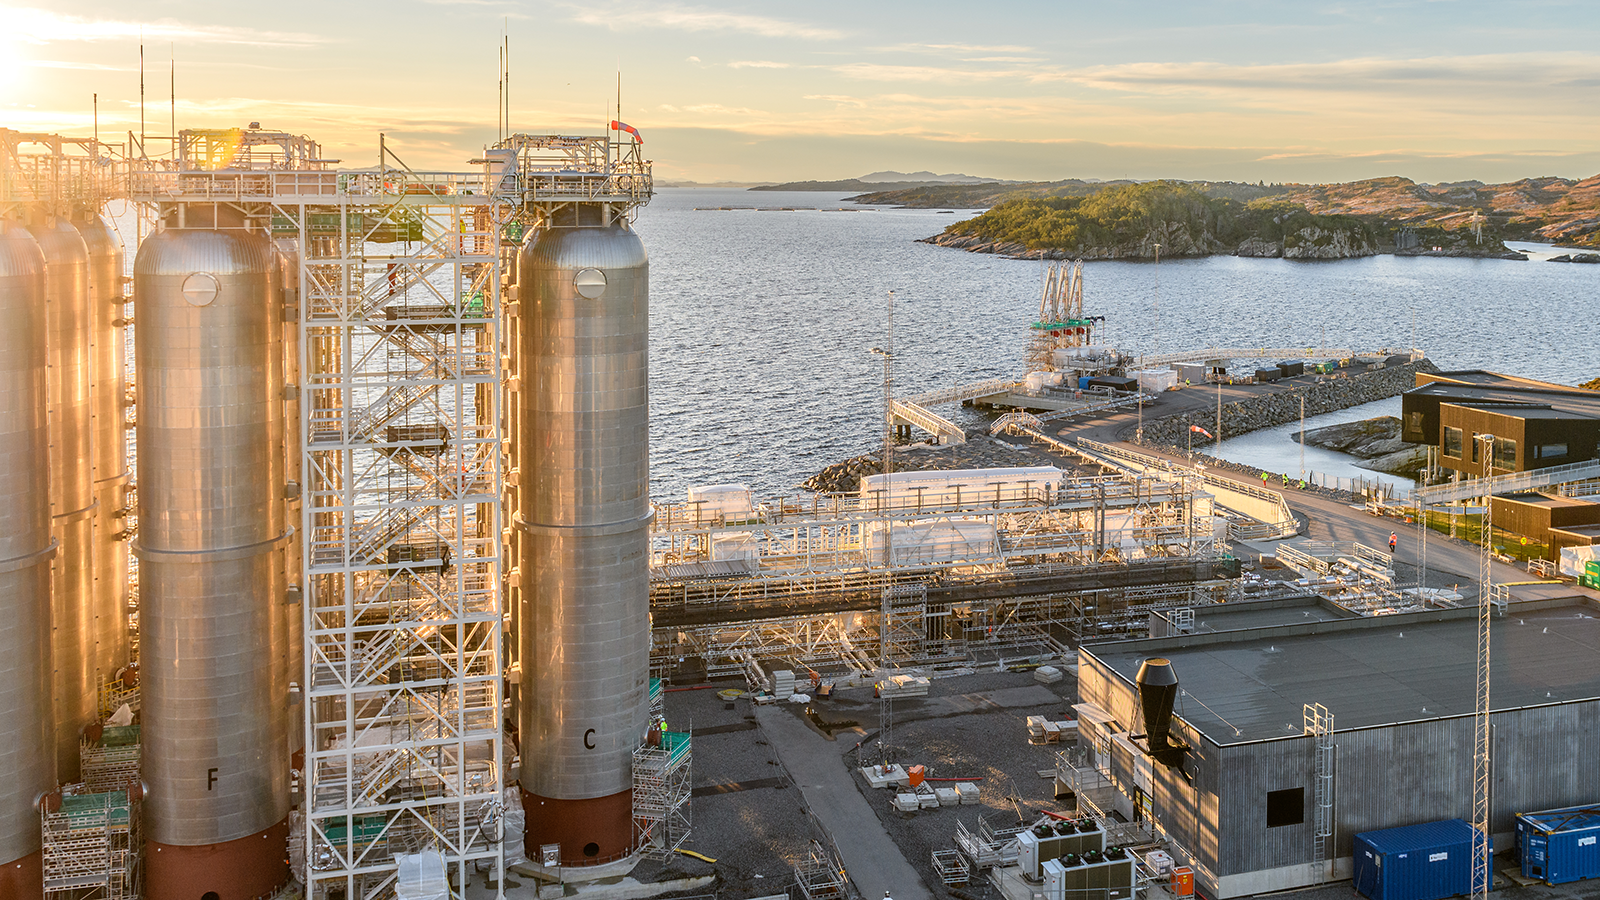 Norway’s offshore carbon storage plans – safe solution or environmental risk?